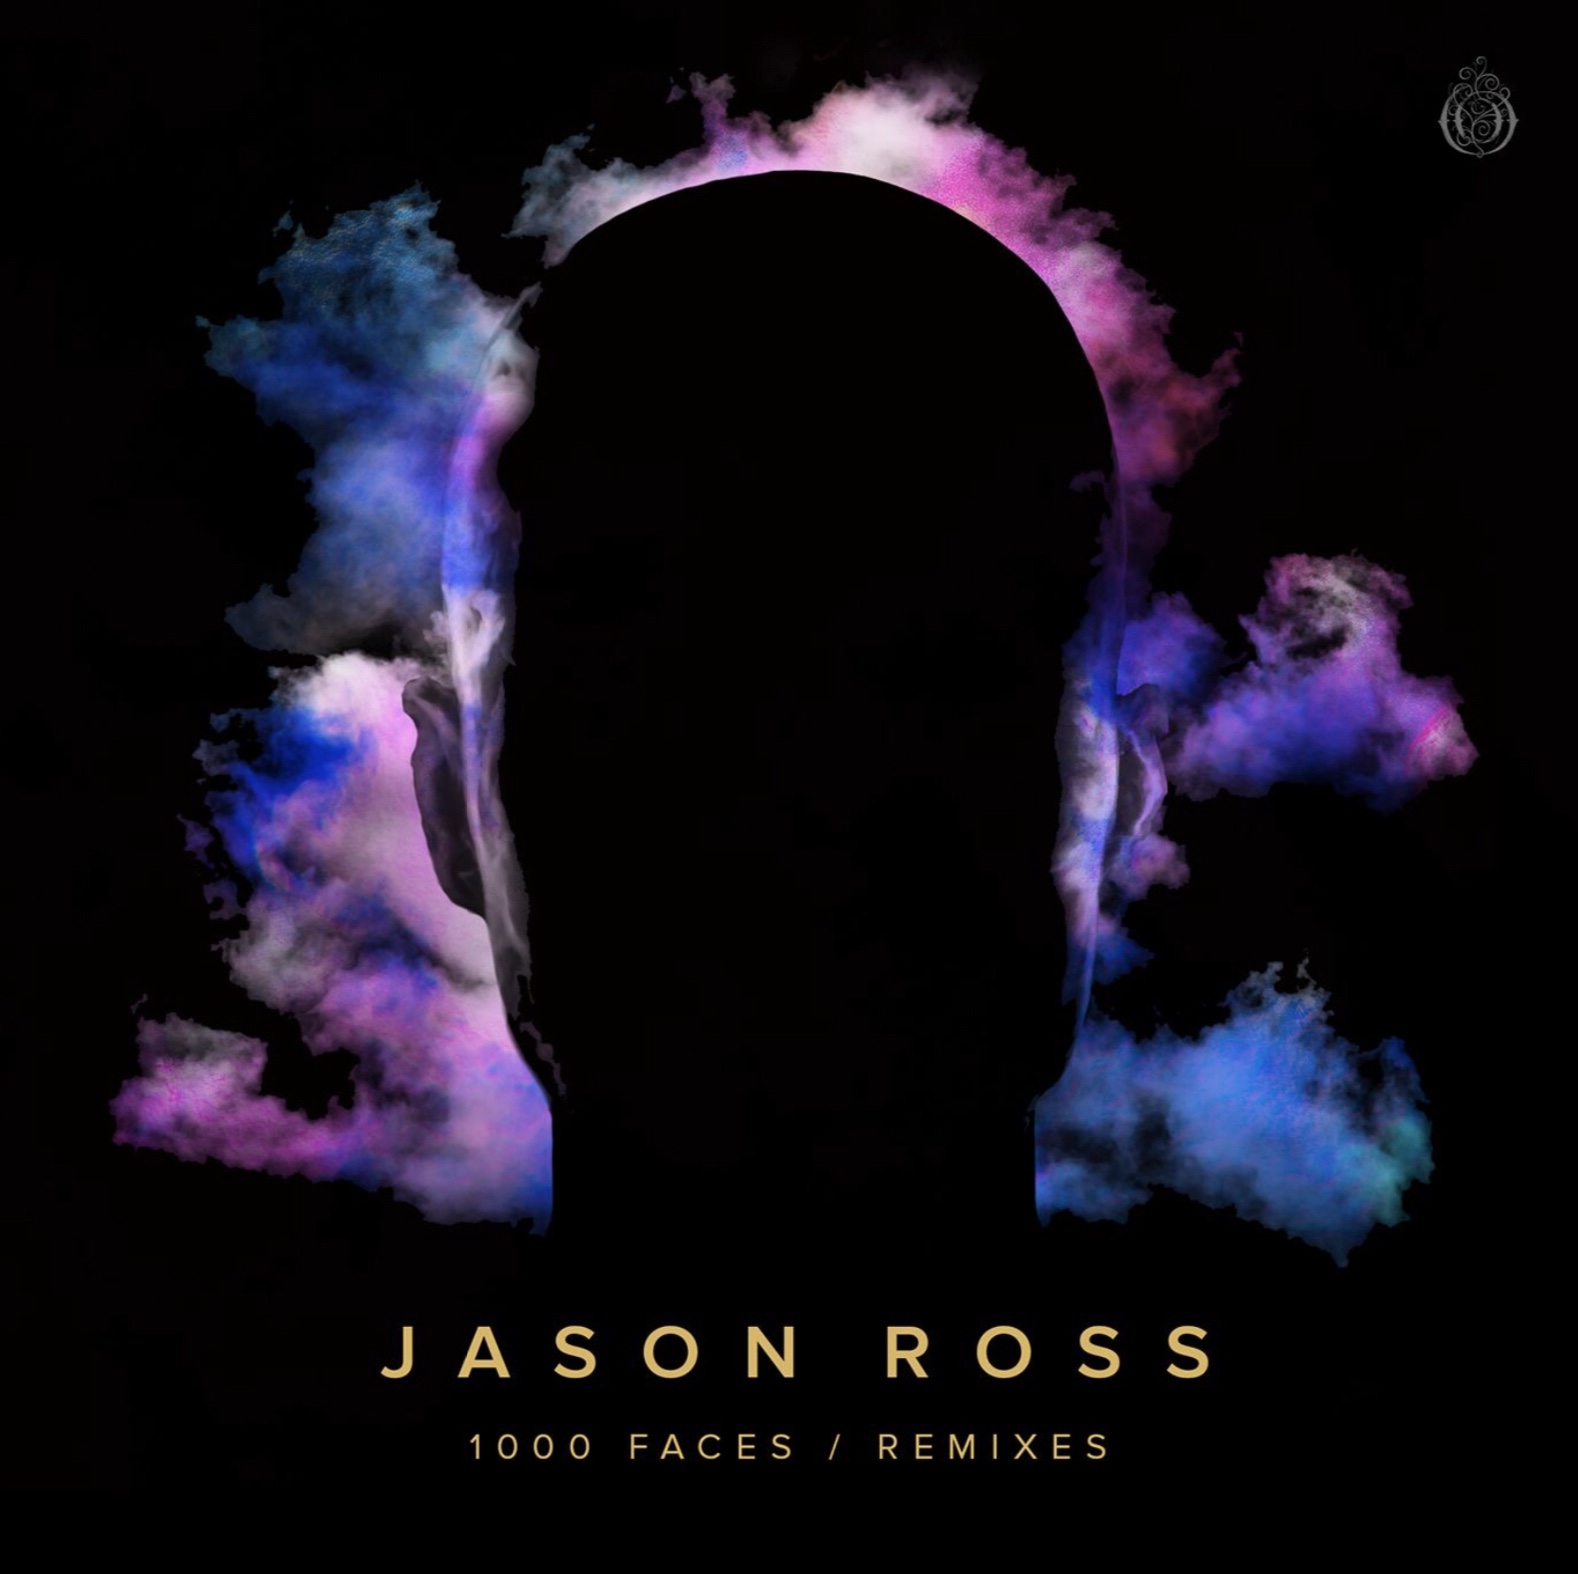 Jason Ross Releases Official ‘1000 Faces Remix’ Album, Featuring Trivecta, Sunny LAX, No Mana, and More